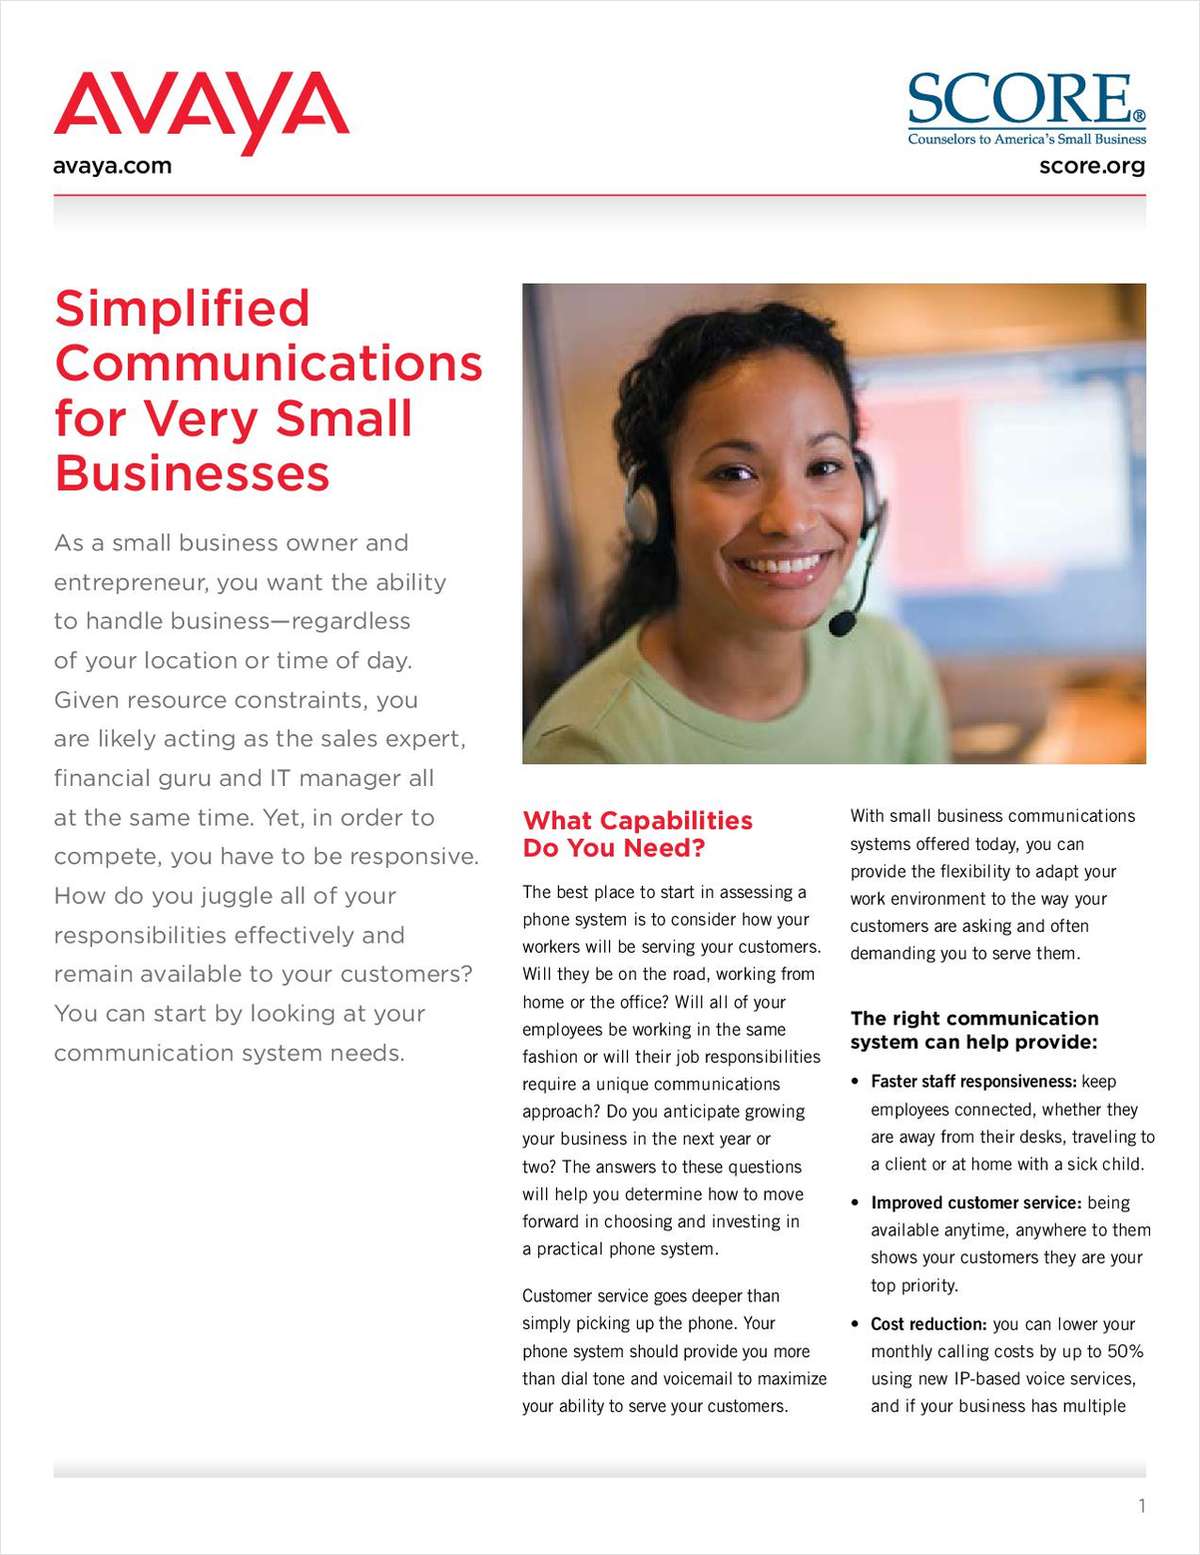 Simplified Communications for Very Small Businesses